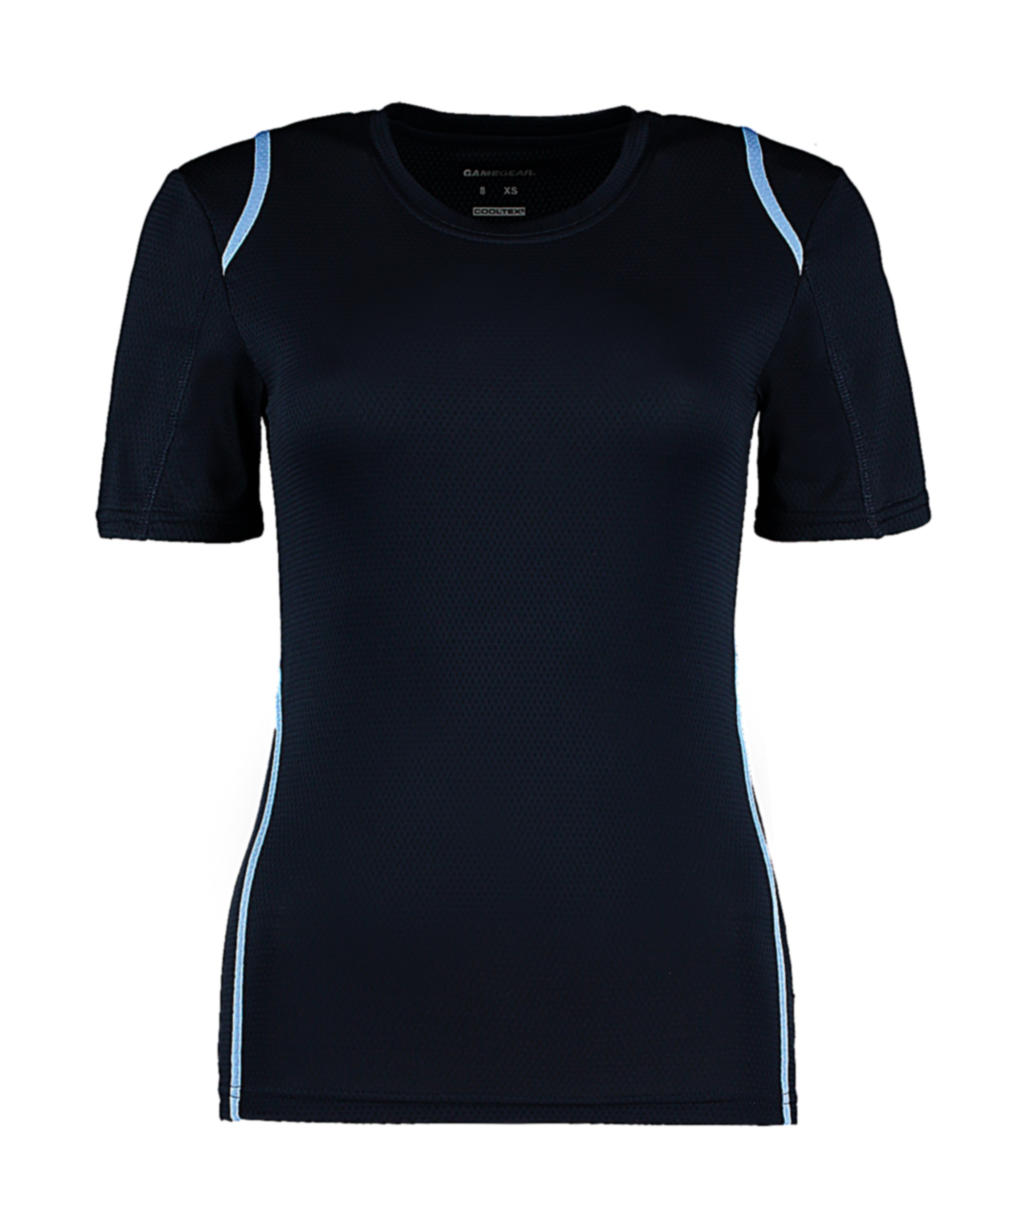  Womens Regular Fit Cooltex? Contrast Tee in Farbe Navy/Light Blue